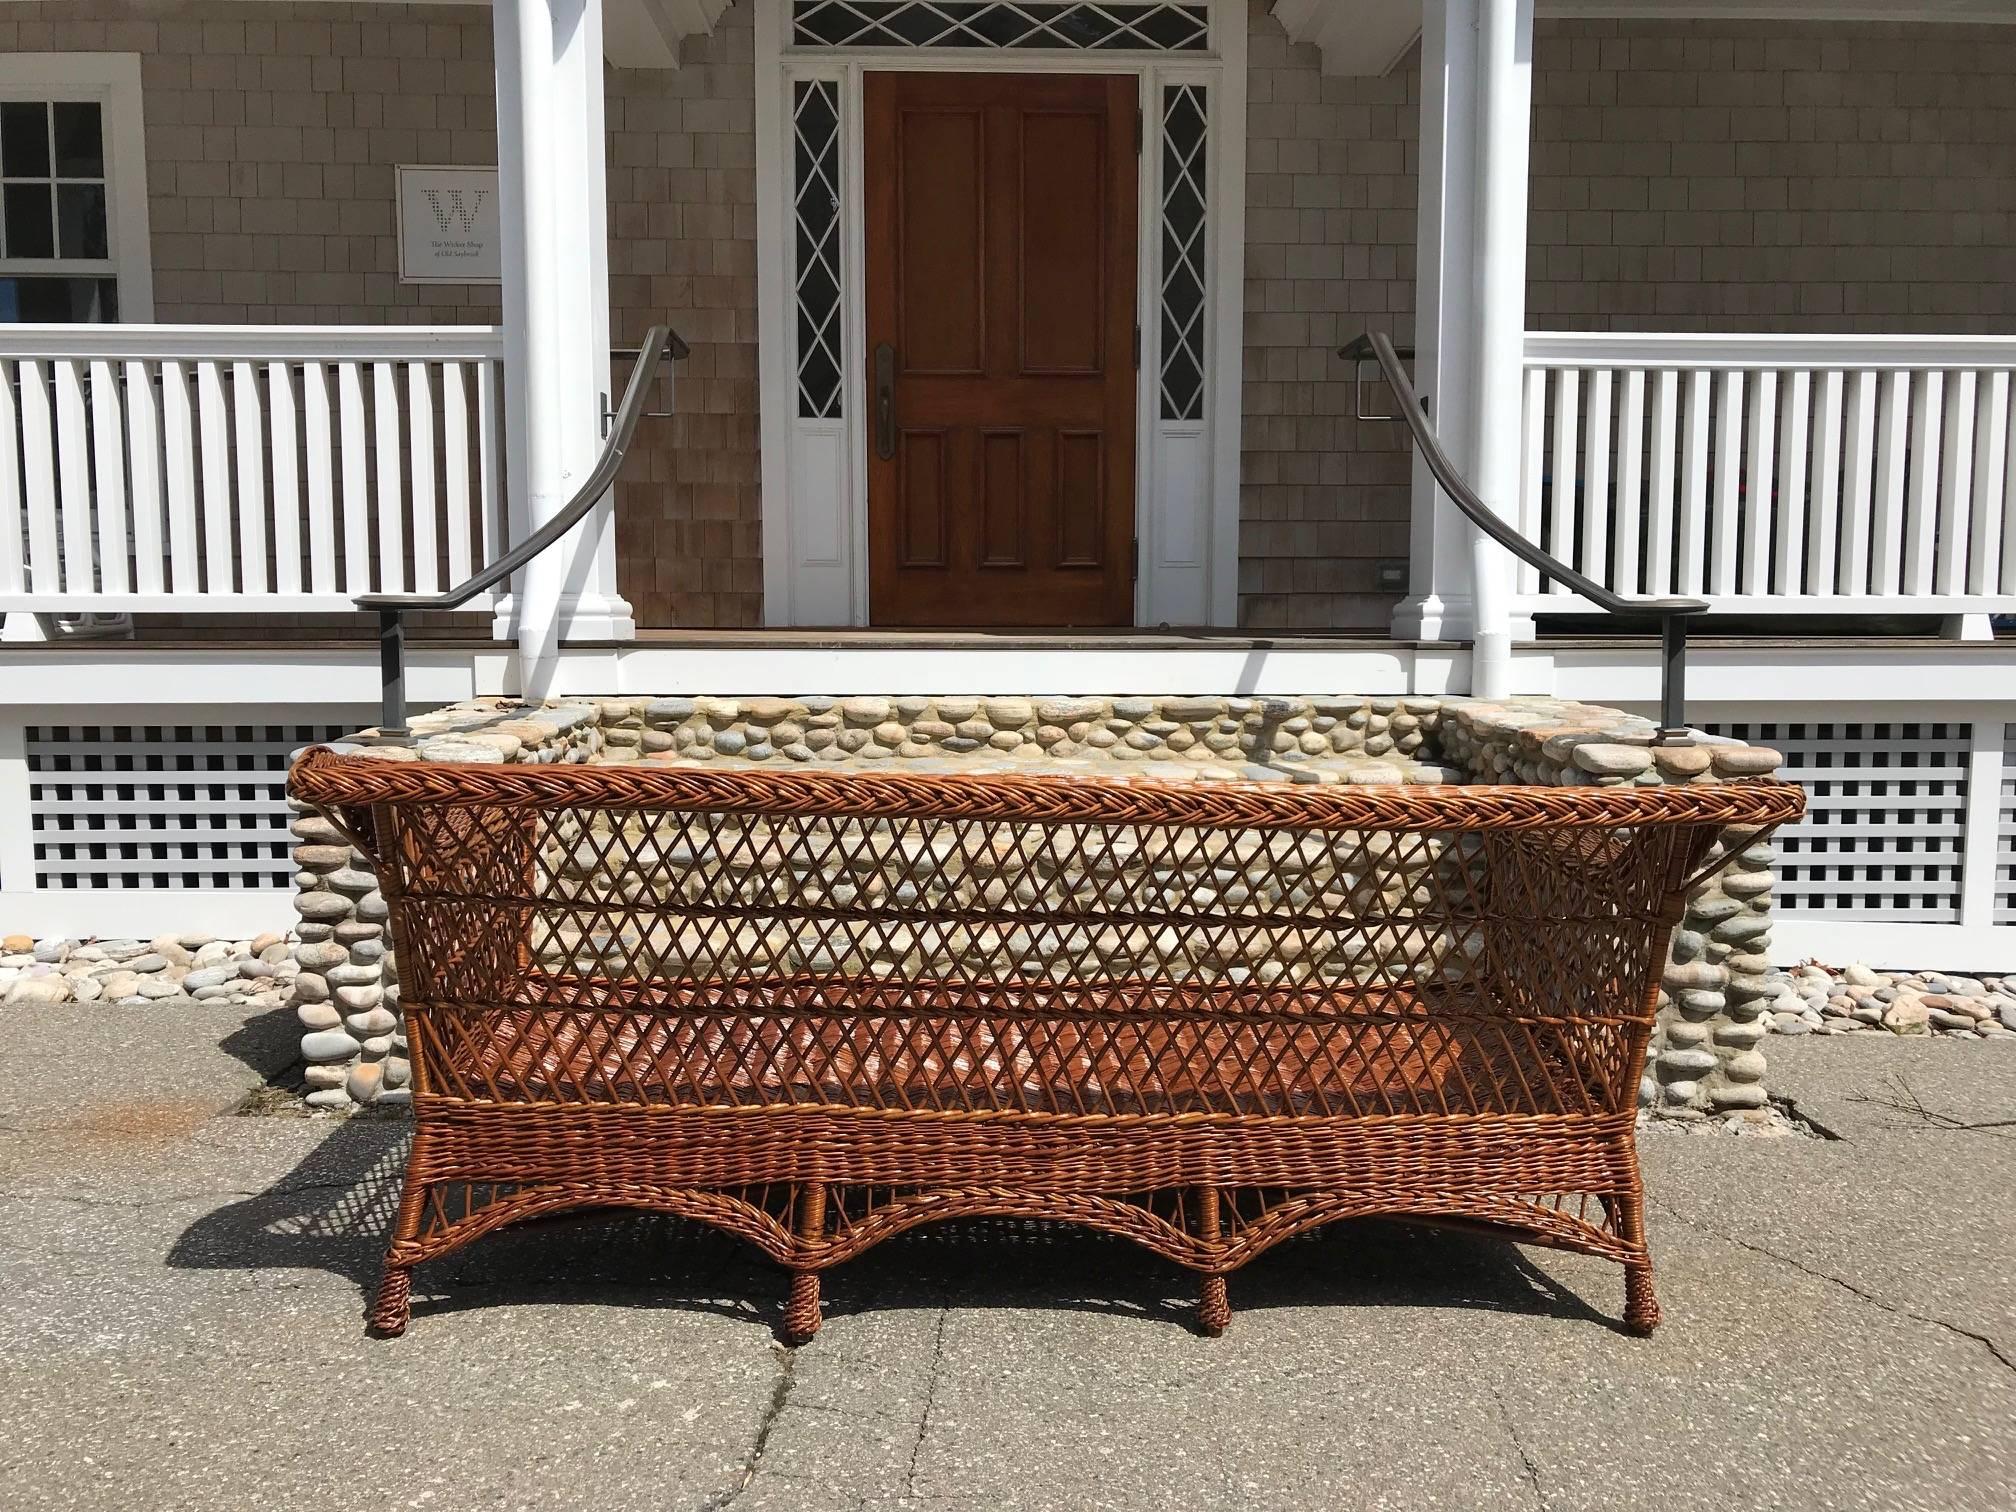 Beautiful antique bar harbor shelf back wicker set woven of willow in natural finish. Sofa measures 81 inches long, 36 inches deep, and 33 inches tall. The sofa arm height is 26.5 inches and the seat height is 13.5 inches. Chairs measure 30 inches